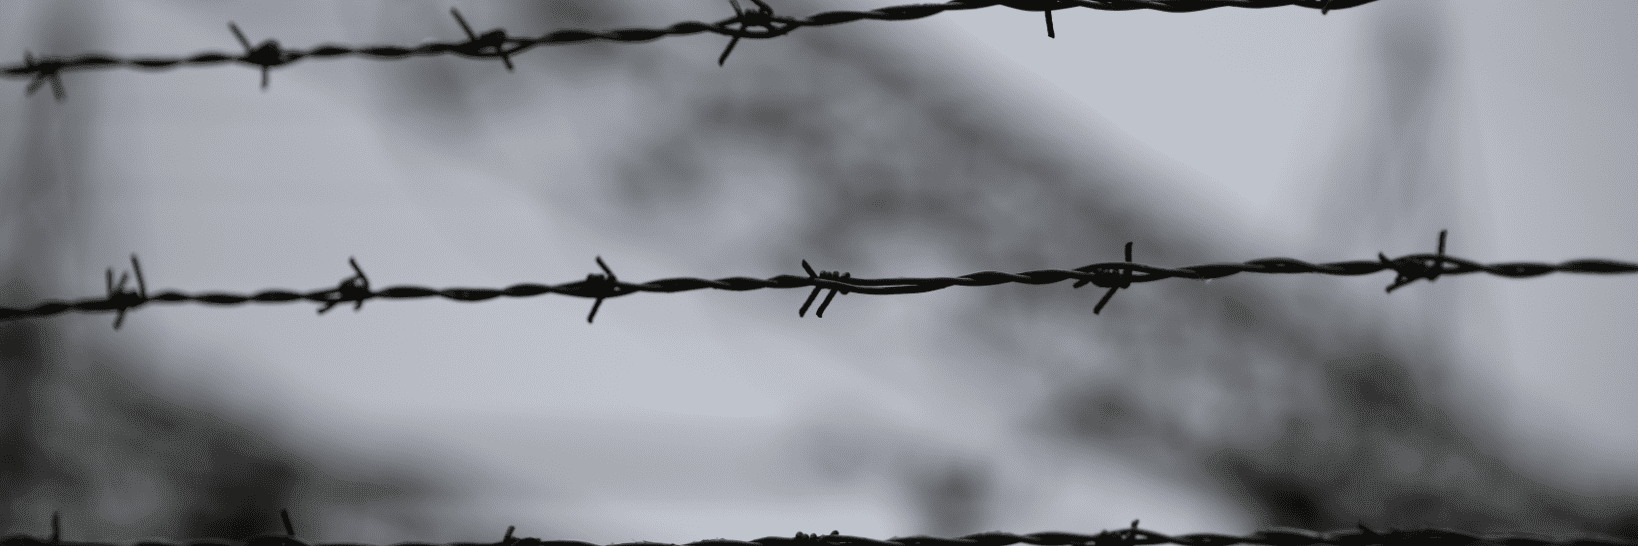 barbed wire with the blurred background of a refugee camp 2